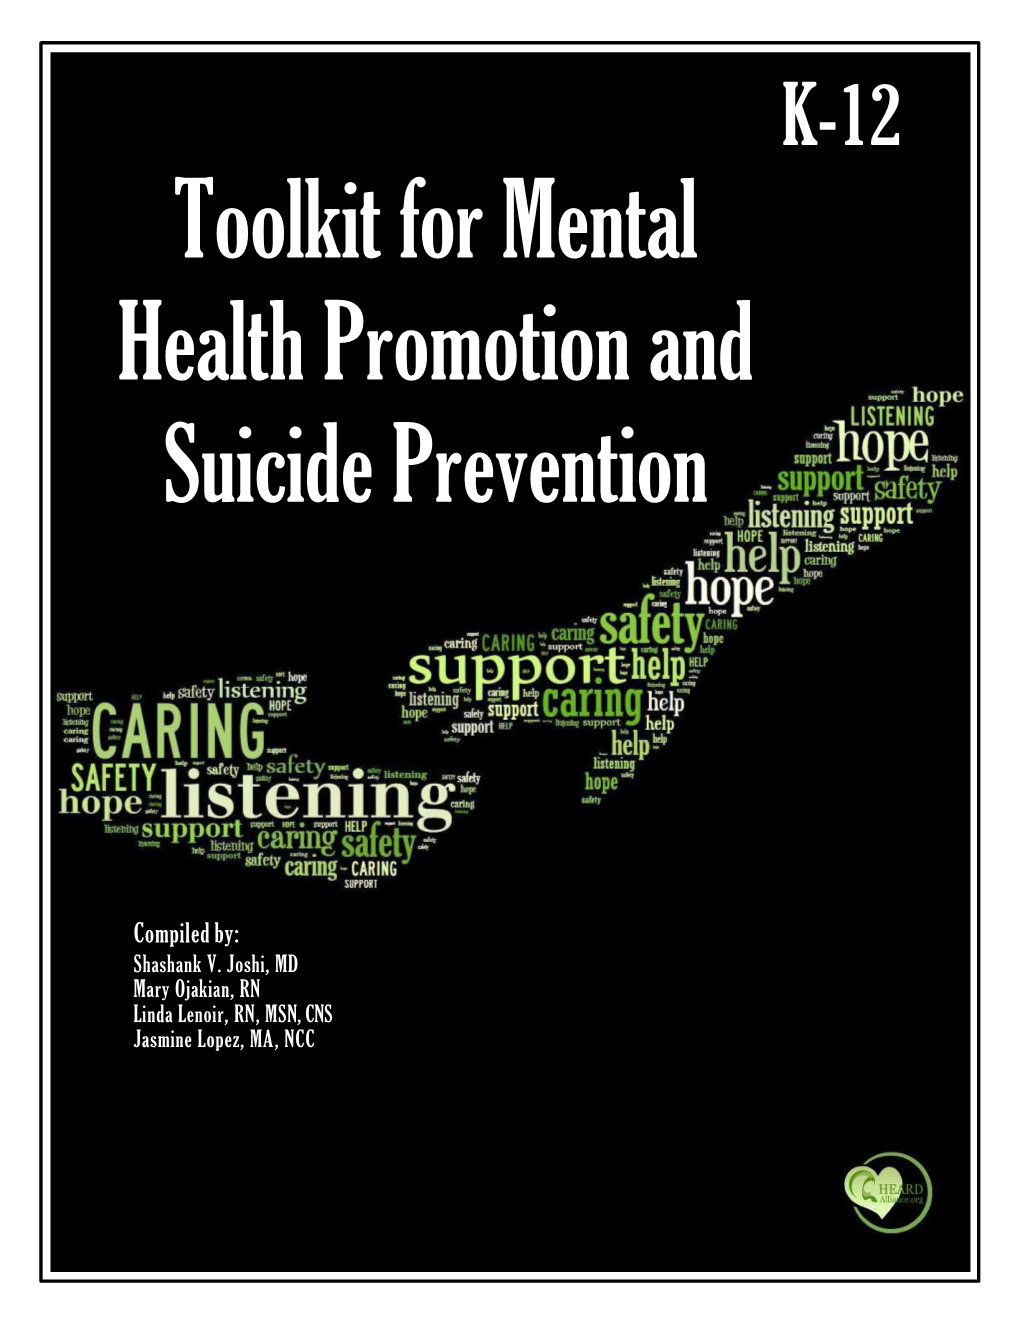 HEARD Toolkit for Mental Health Promotion and Suicide Prevention